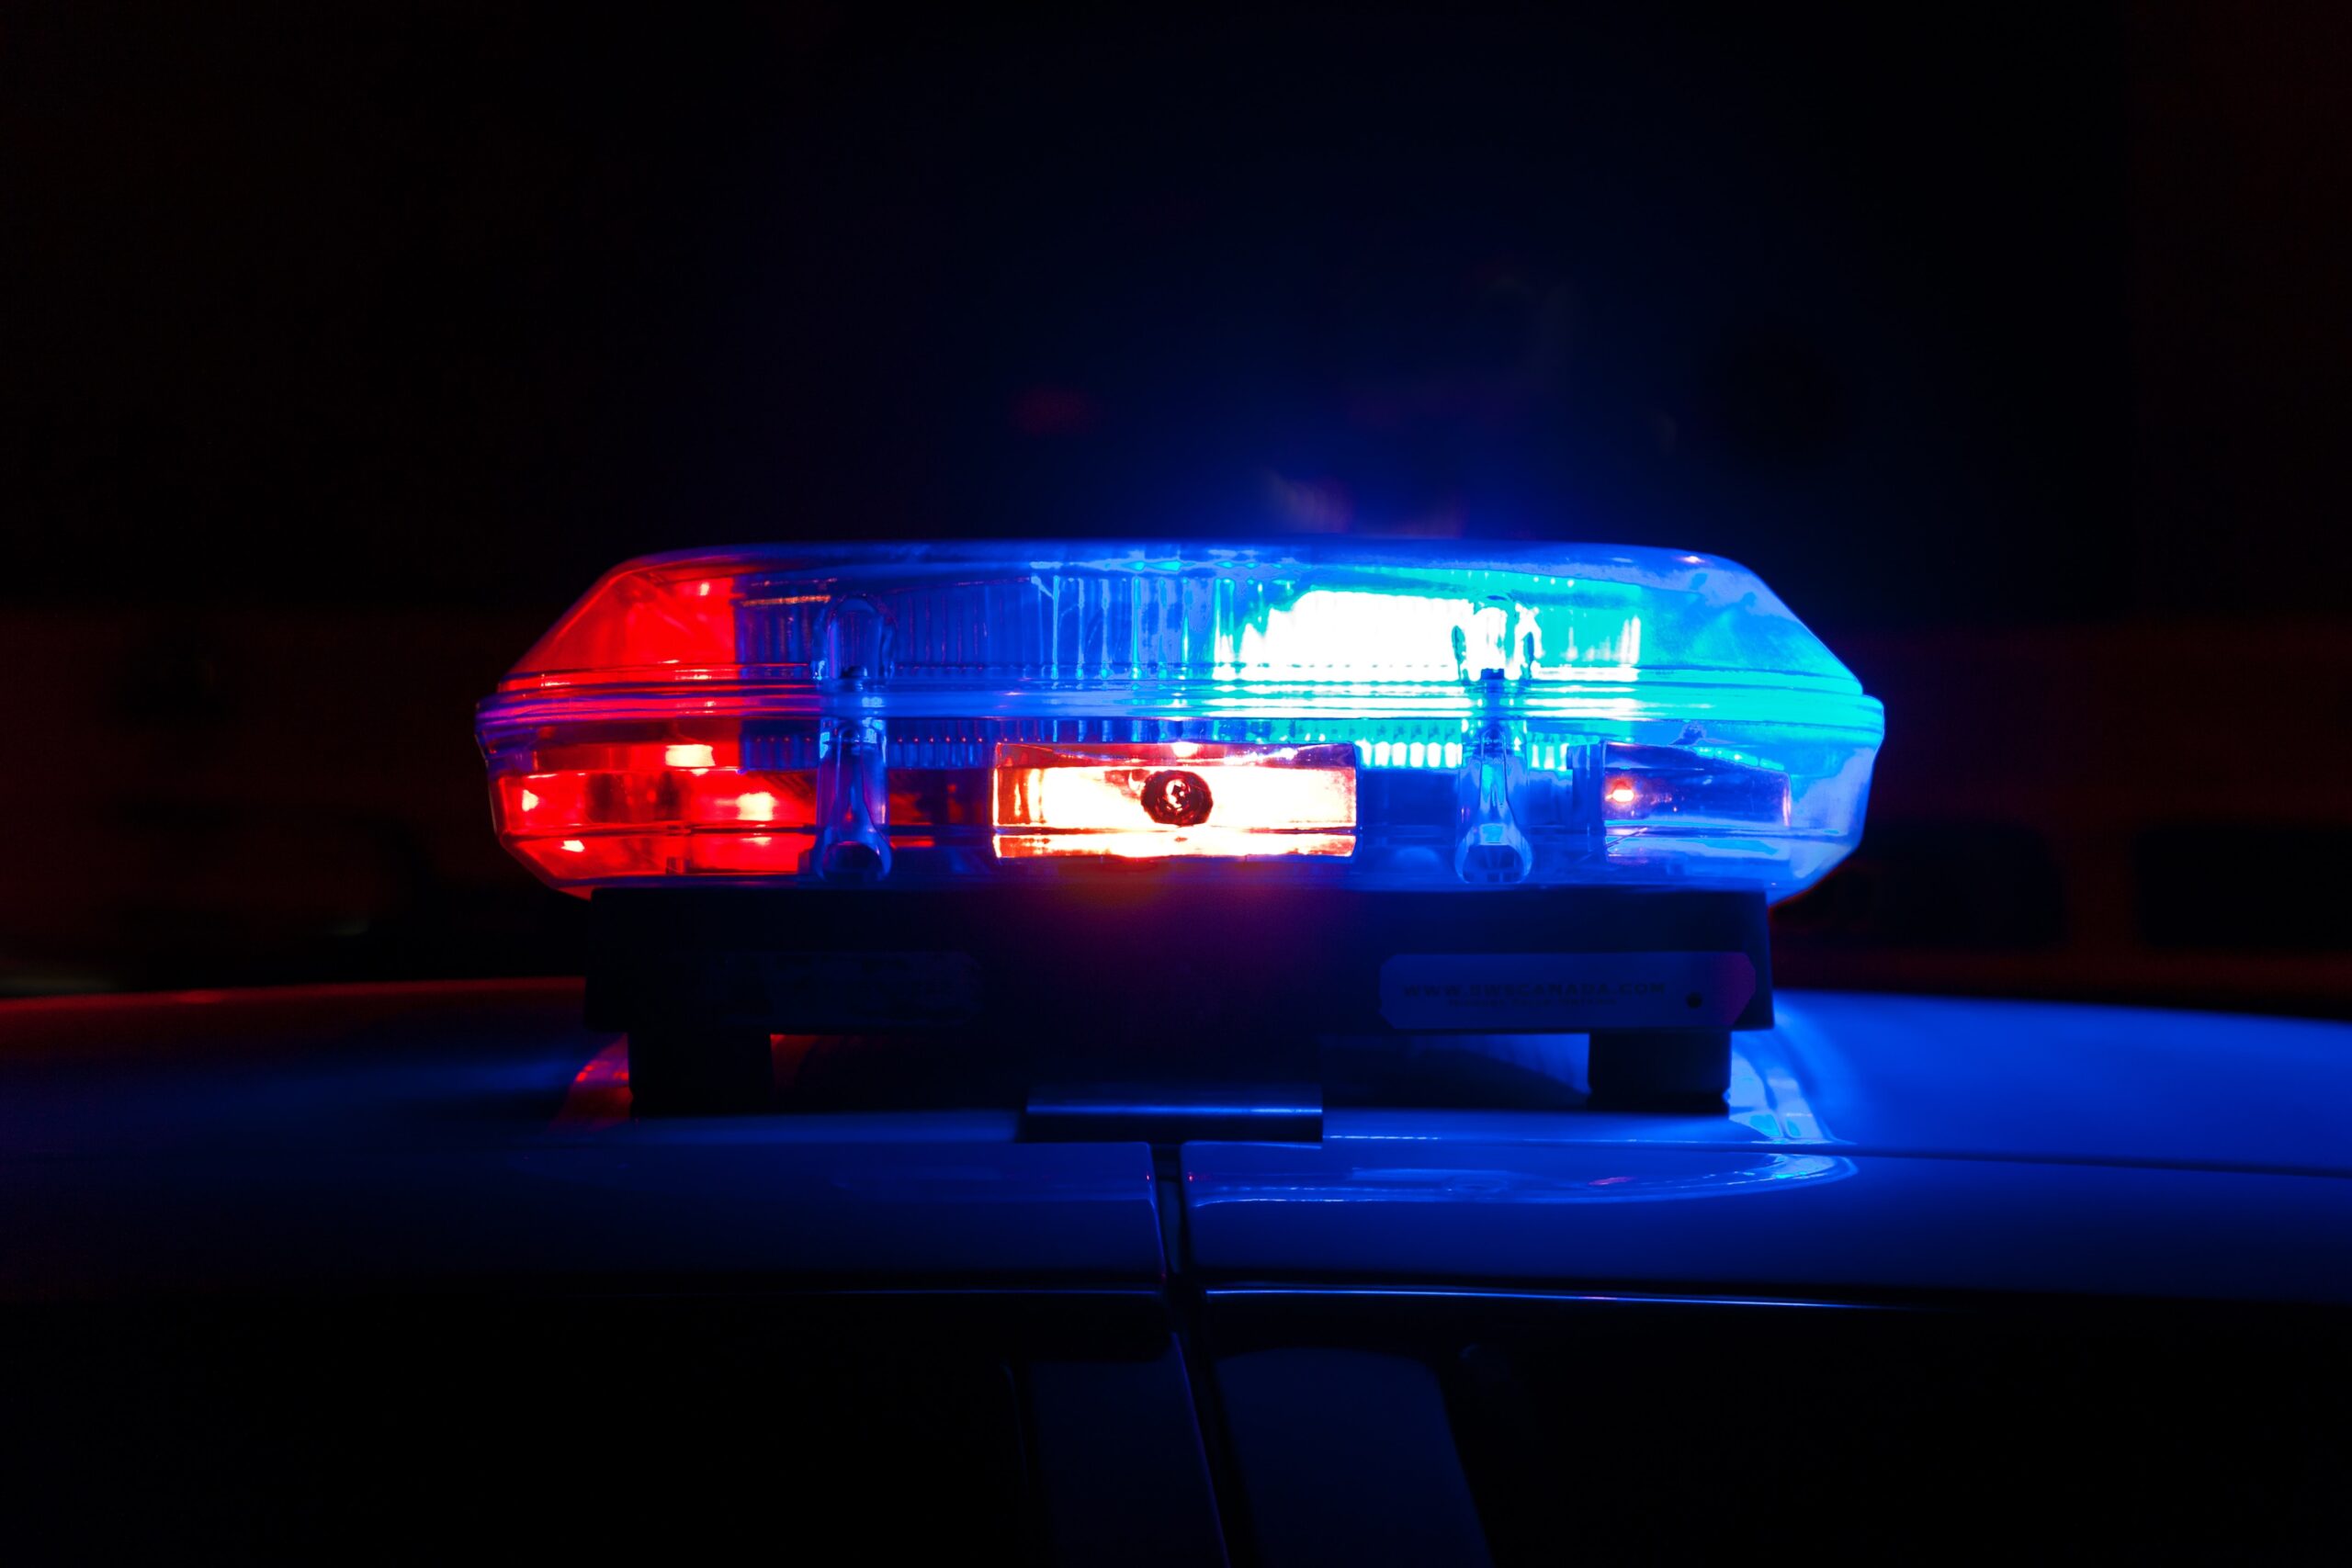 A close-up of police cars' illuminated red and blue siren lights against a dark nighttime background.